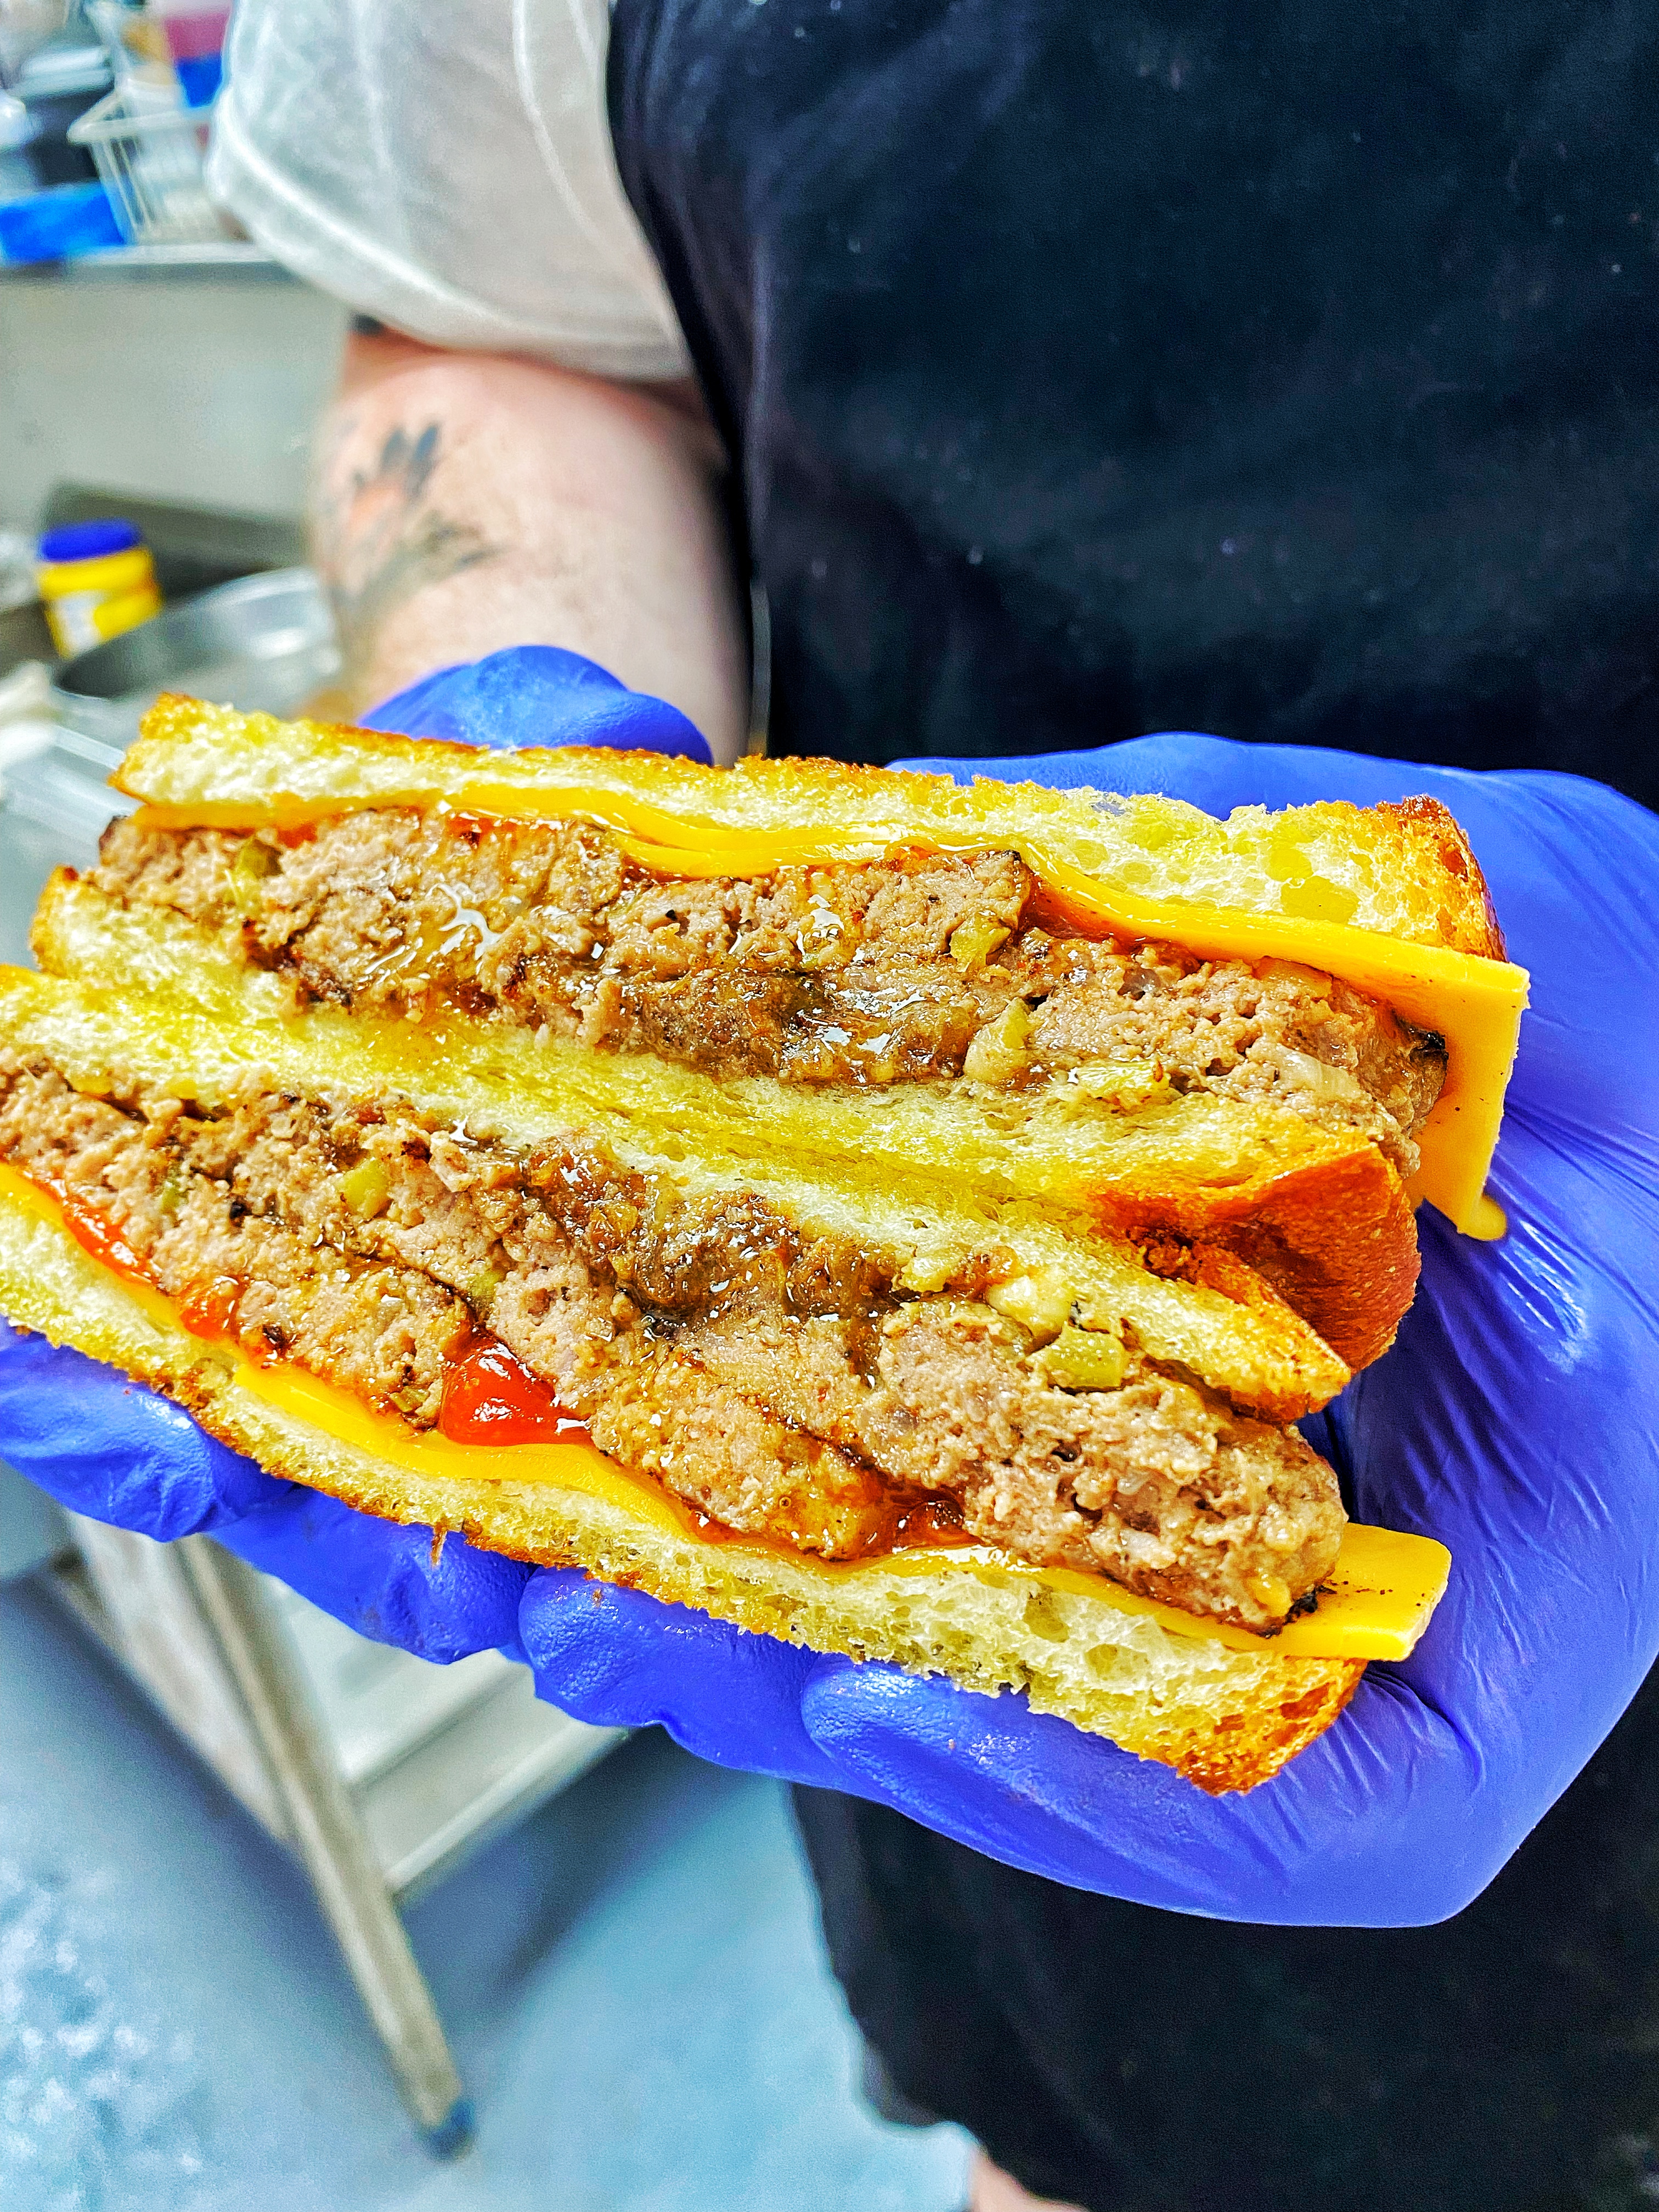 Picture of a meatloaf sandwich in a cook's hands